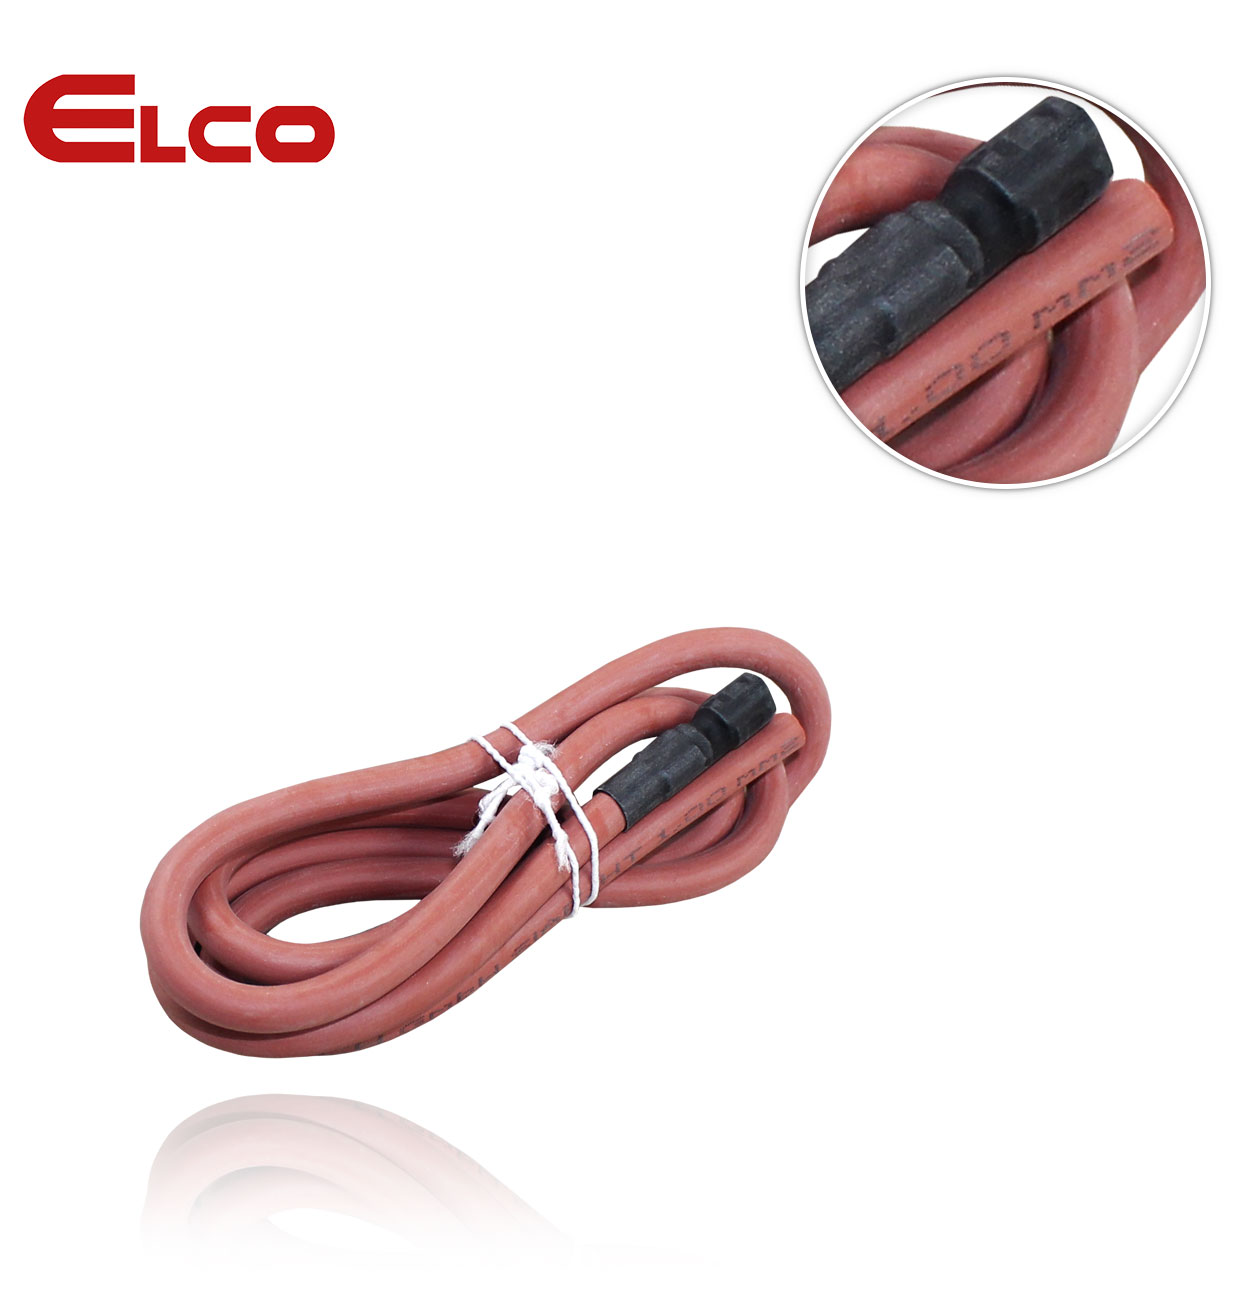 CLP 6.35 L1000 ELCO IONISATION CABLE